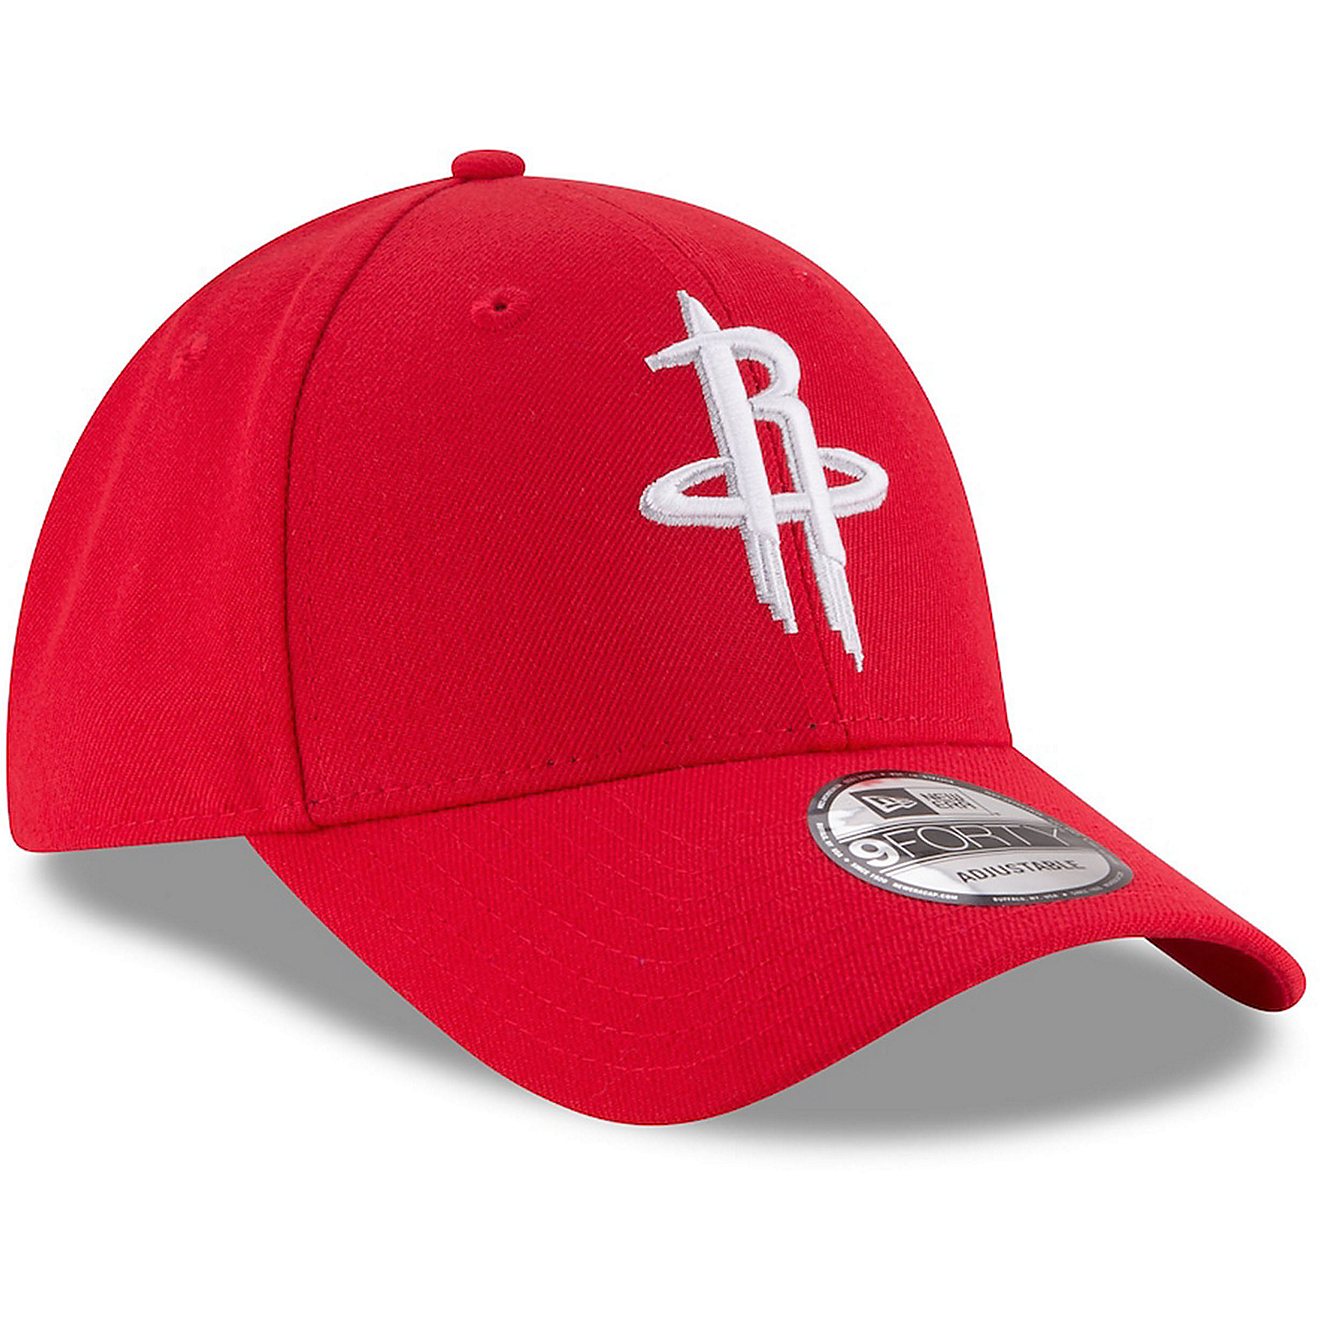 New Era Youth Houston Rockets 9FORTY League Cap                                                                                  - view number 3